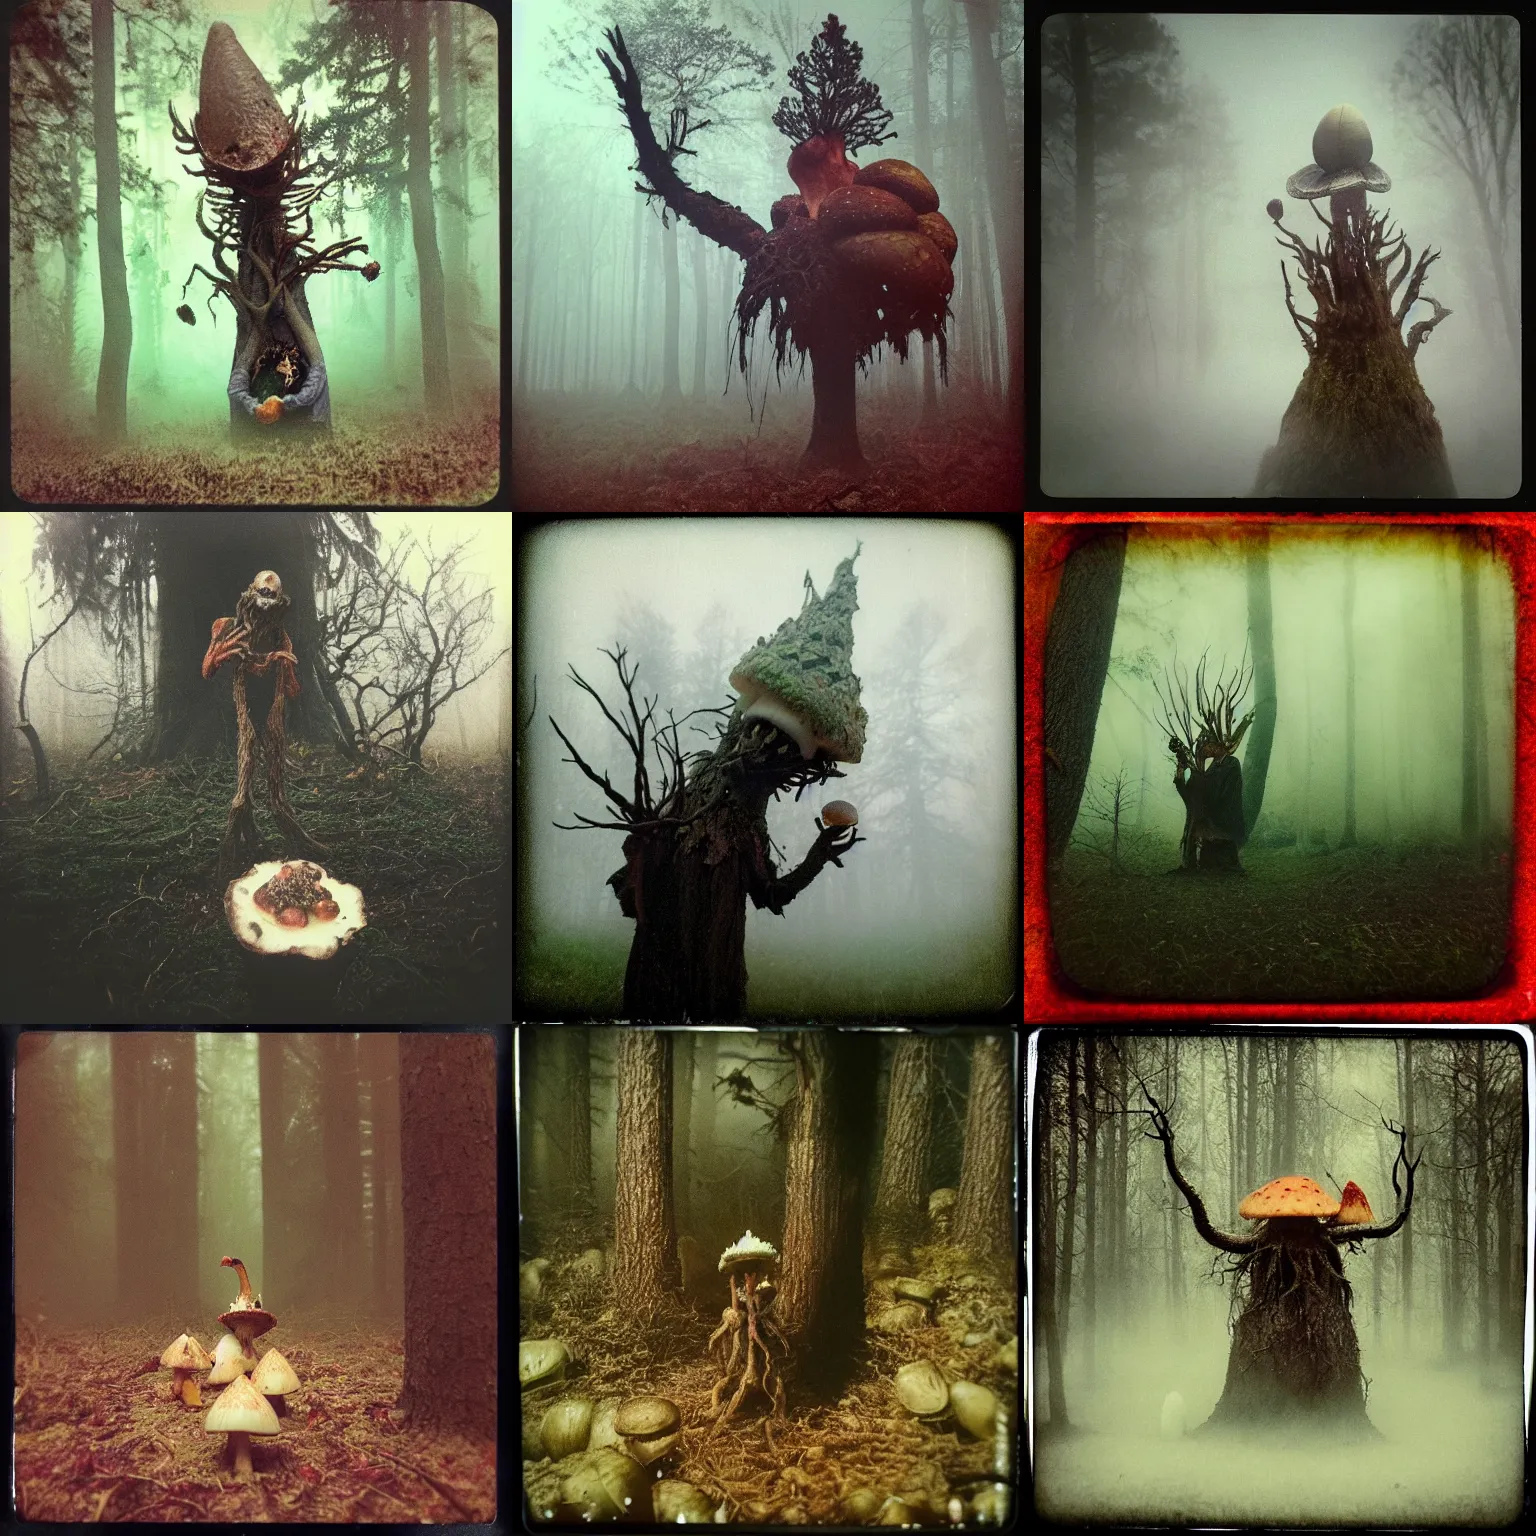 Prompt: angry hungry treebeard stuffing amanita mushrooms!!! 🍄 into his gaping maw, dark fantasy horror, ominous, disturbing, foggy, eerie mist, low quality instant camera photo